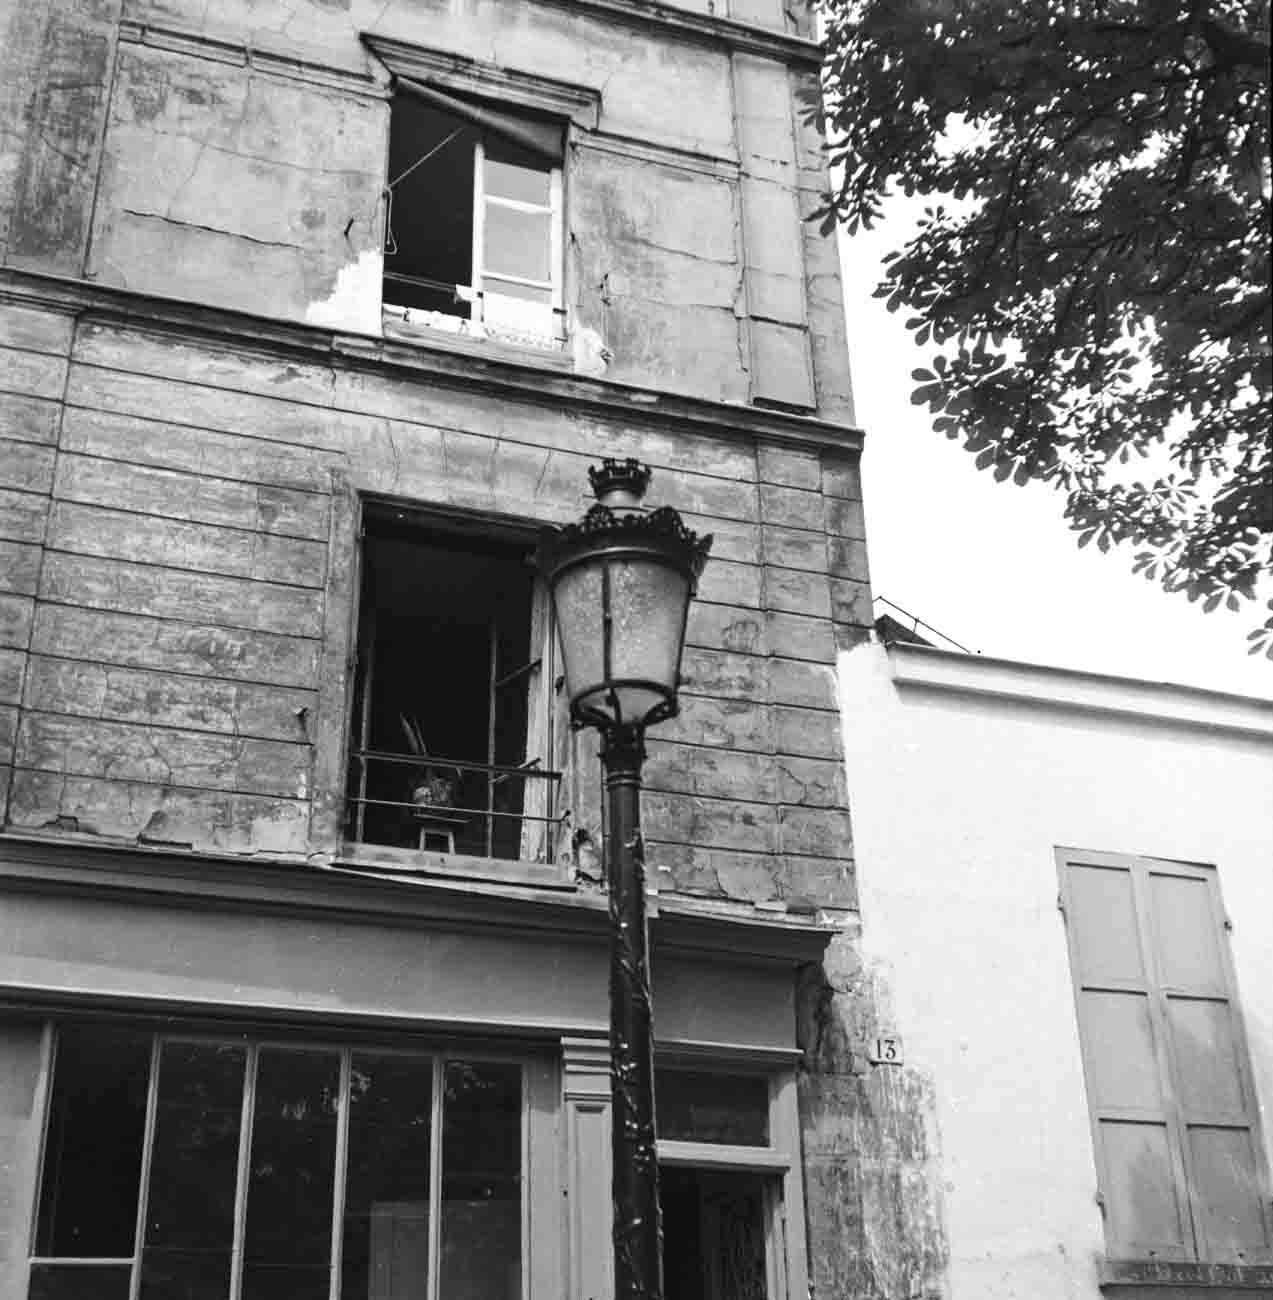 Lantern in front of a house in Paris